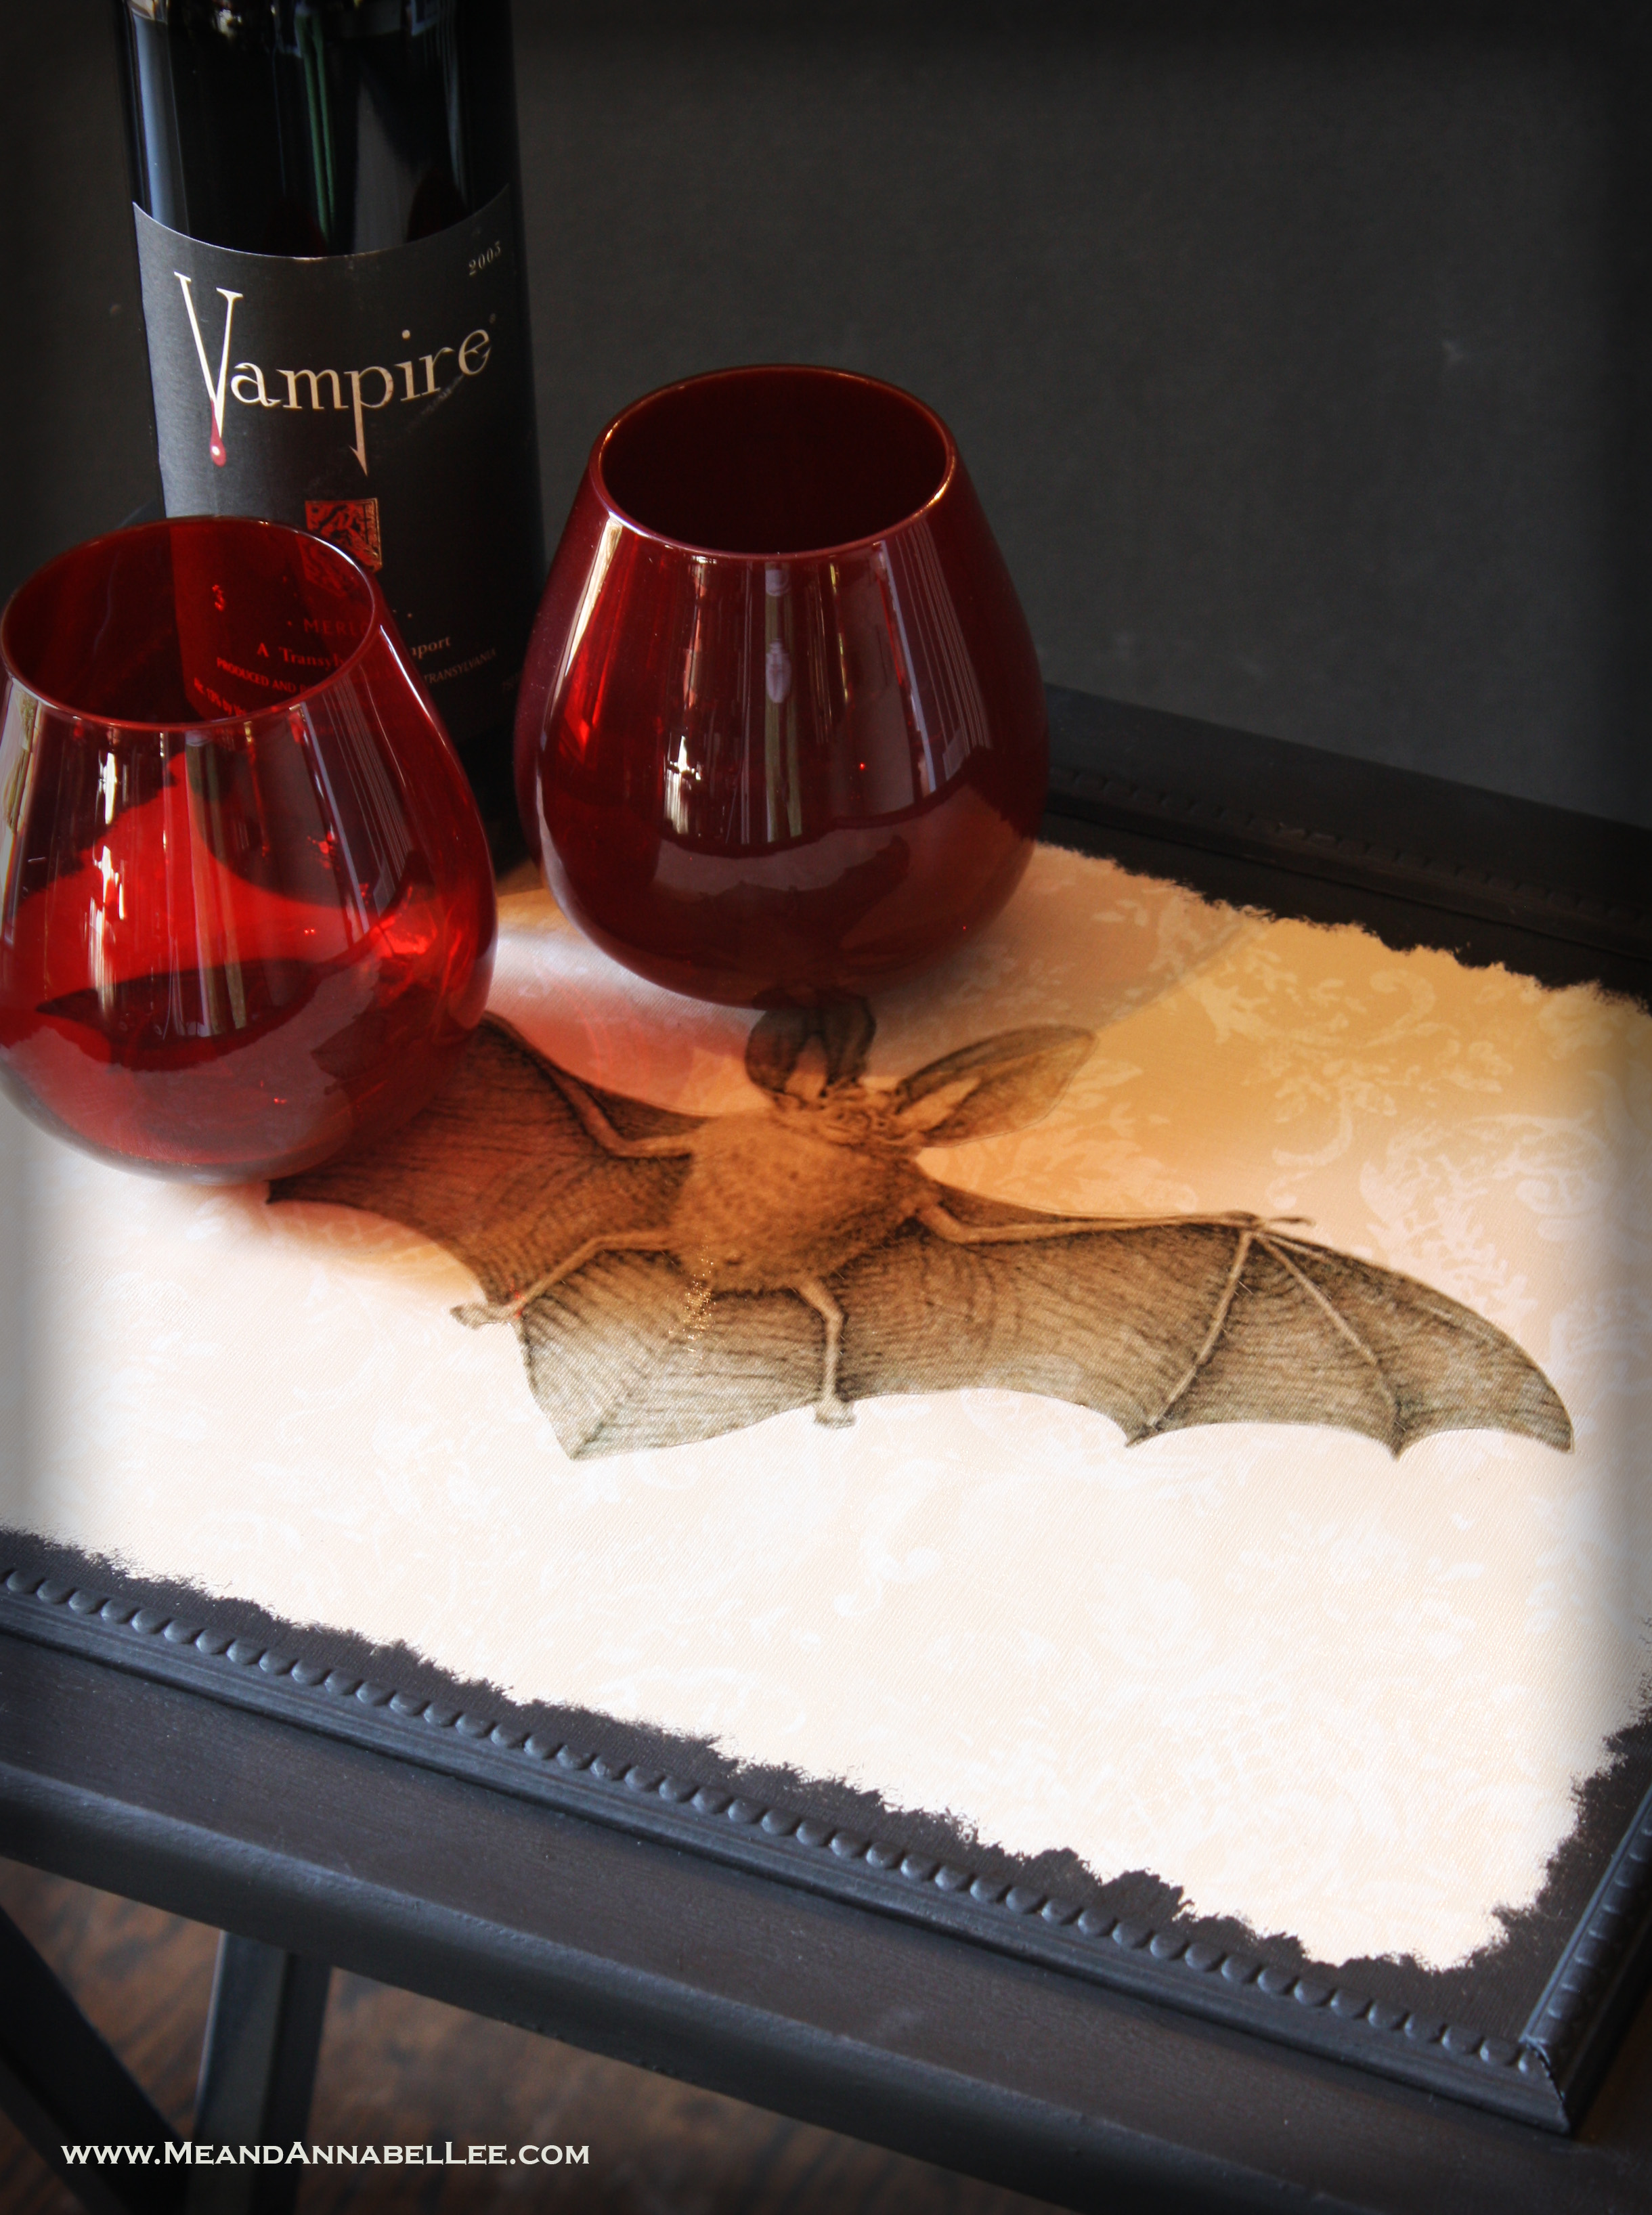 Victorian Gothic Image Transfer | DIY Vintage Vampire Bat TV Tray Table | Goth It Yourself | Silhouette Sticker Paper | Wallpaper projects | www.MeandAnnabelLee.com